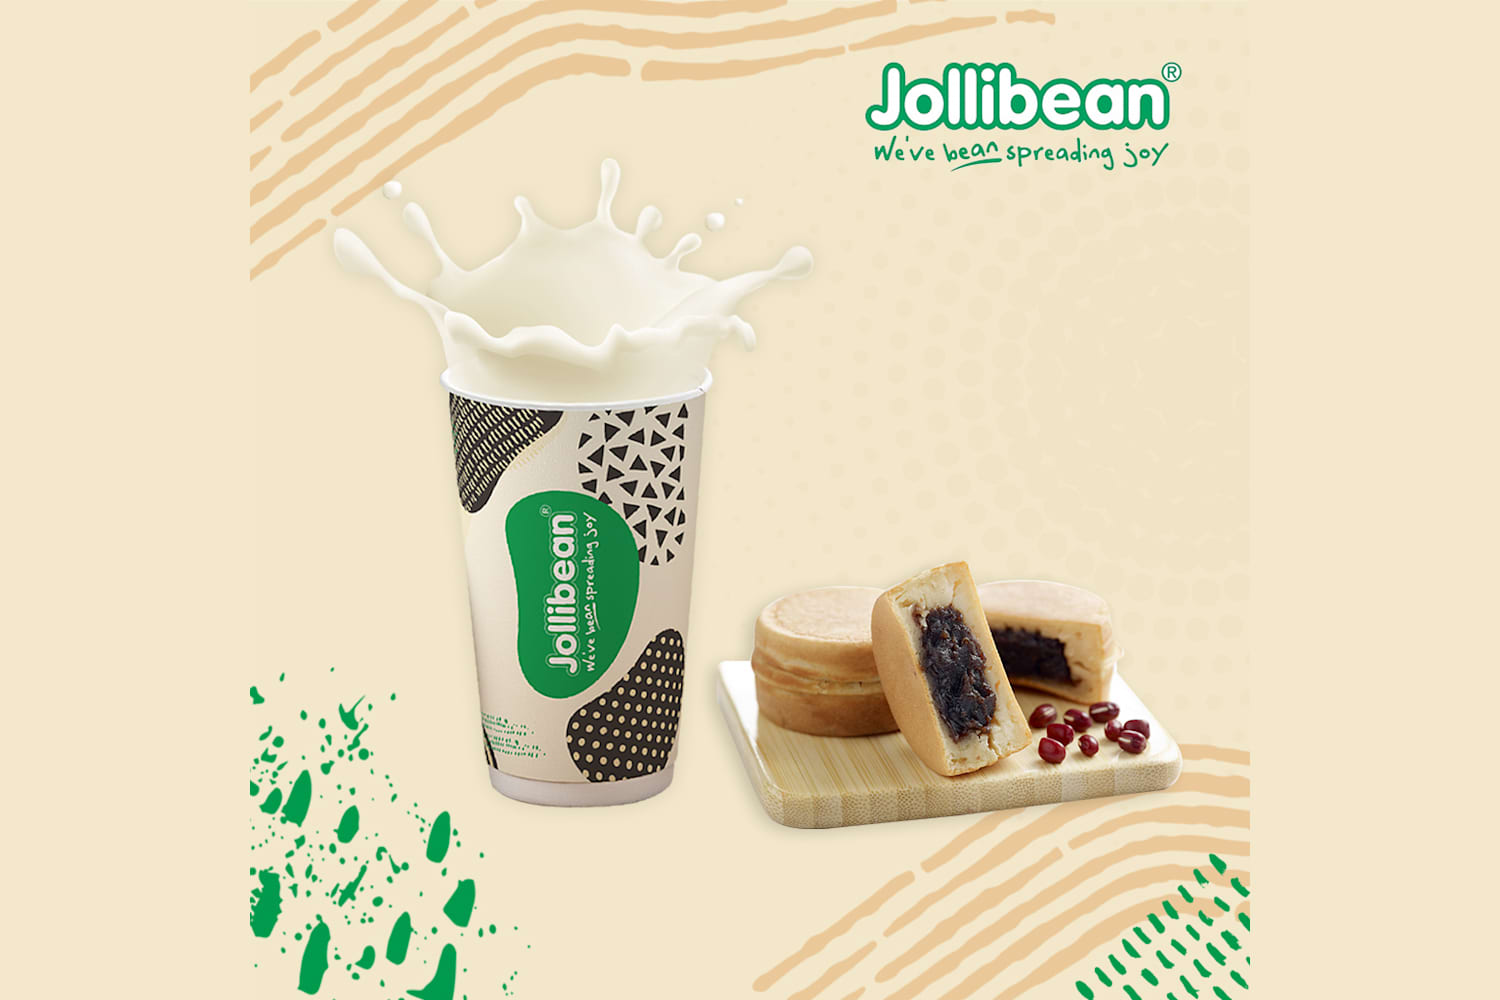 1 x Signature Soy Milk + Maru Pancake Set - exclusive deal at Jollibean - Get Deals, Cashback and Rewards with ShopBack GO